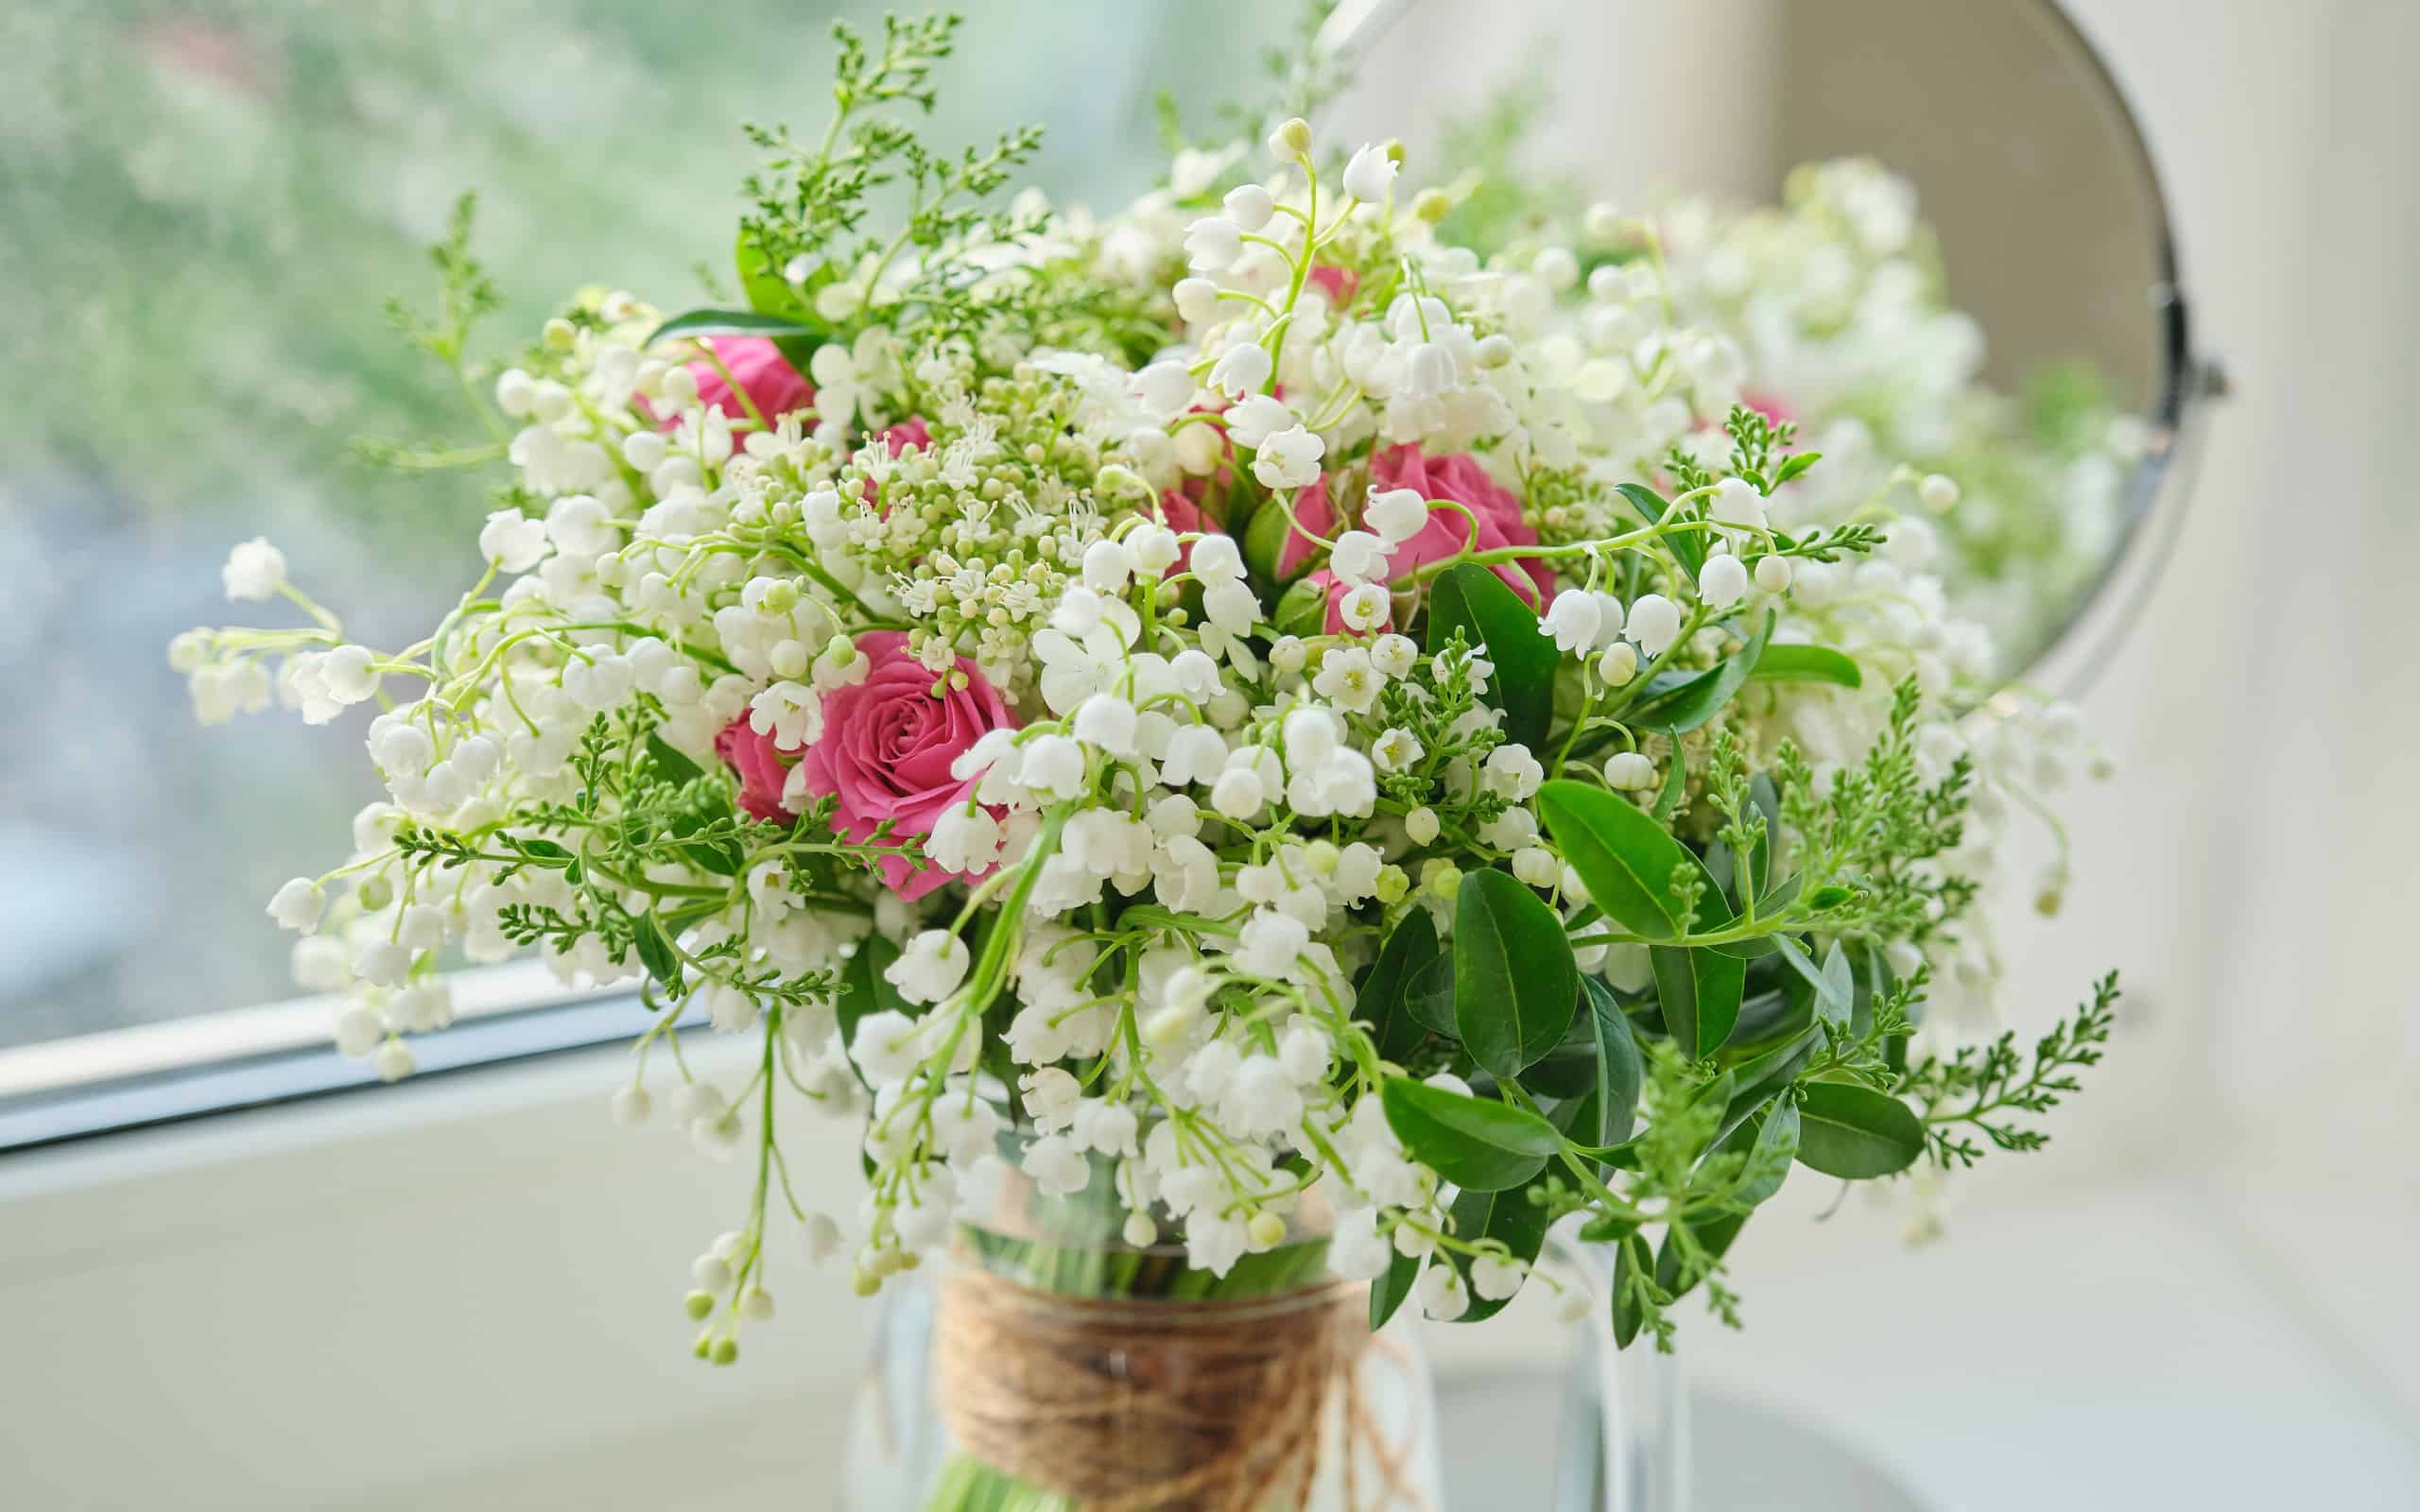 Springtime, spring fresh bouquet of lilies of the valley, pink roses, blooming viburnum